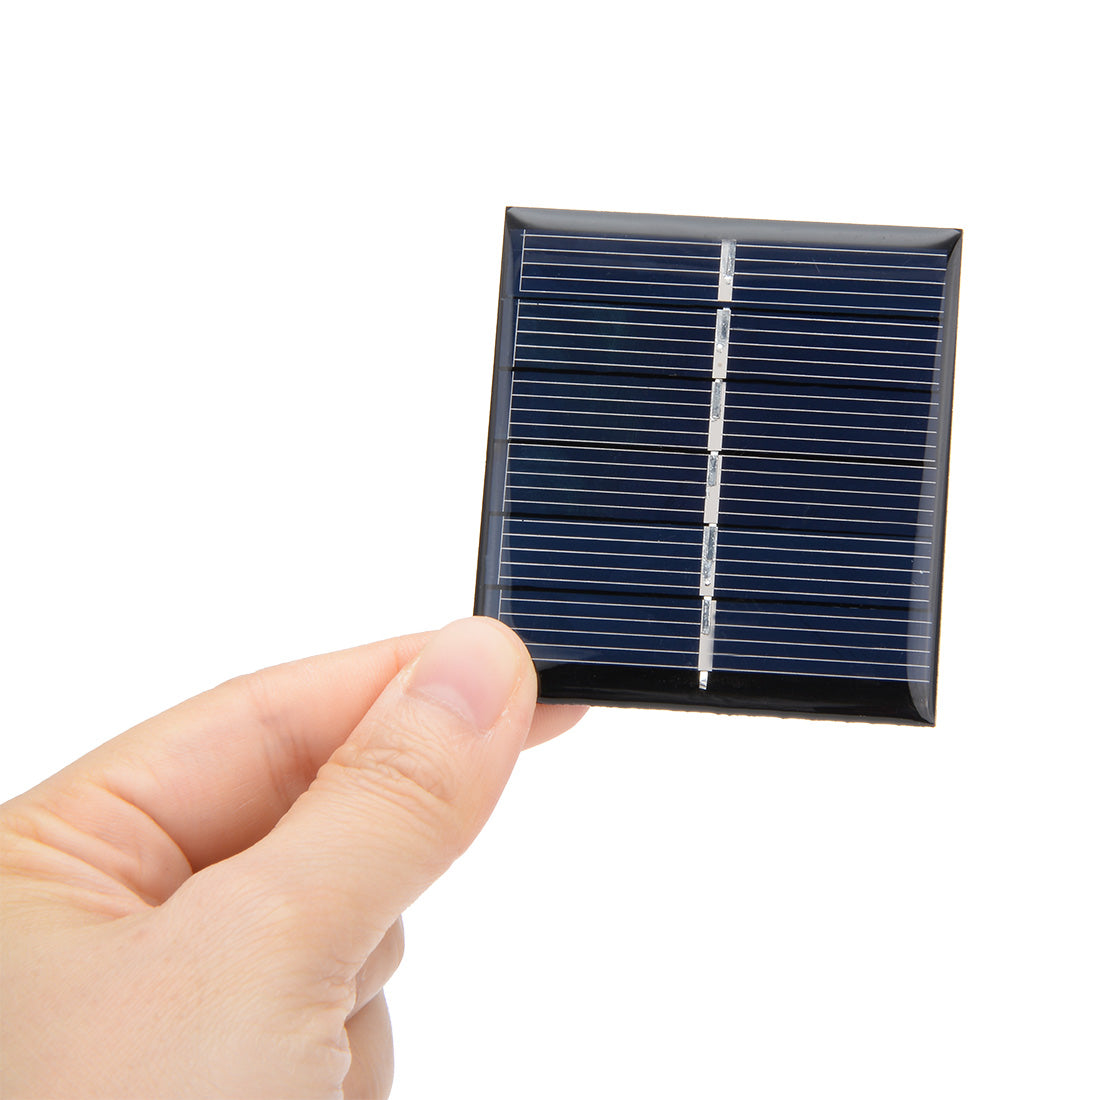 uxcell Uxcell 5Pcs 3V 110mA Poly Mini Solar Cell Panel Module DIY for Light Toys Charger 60mm x 55mm